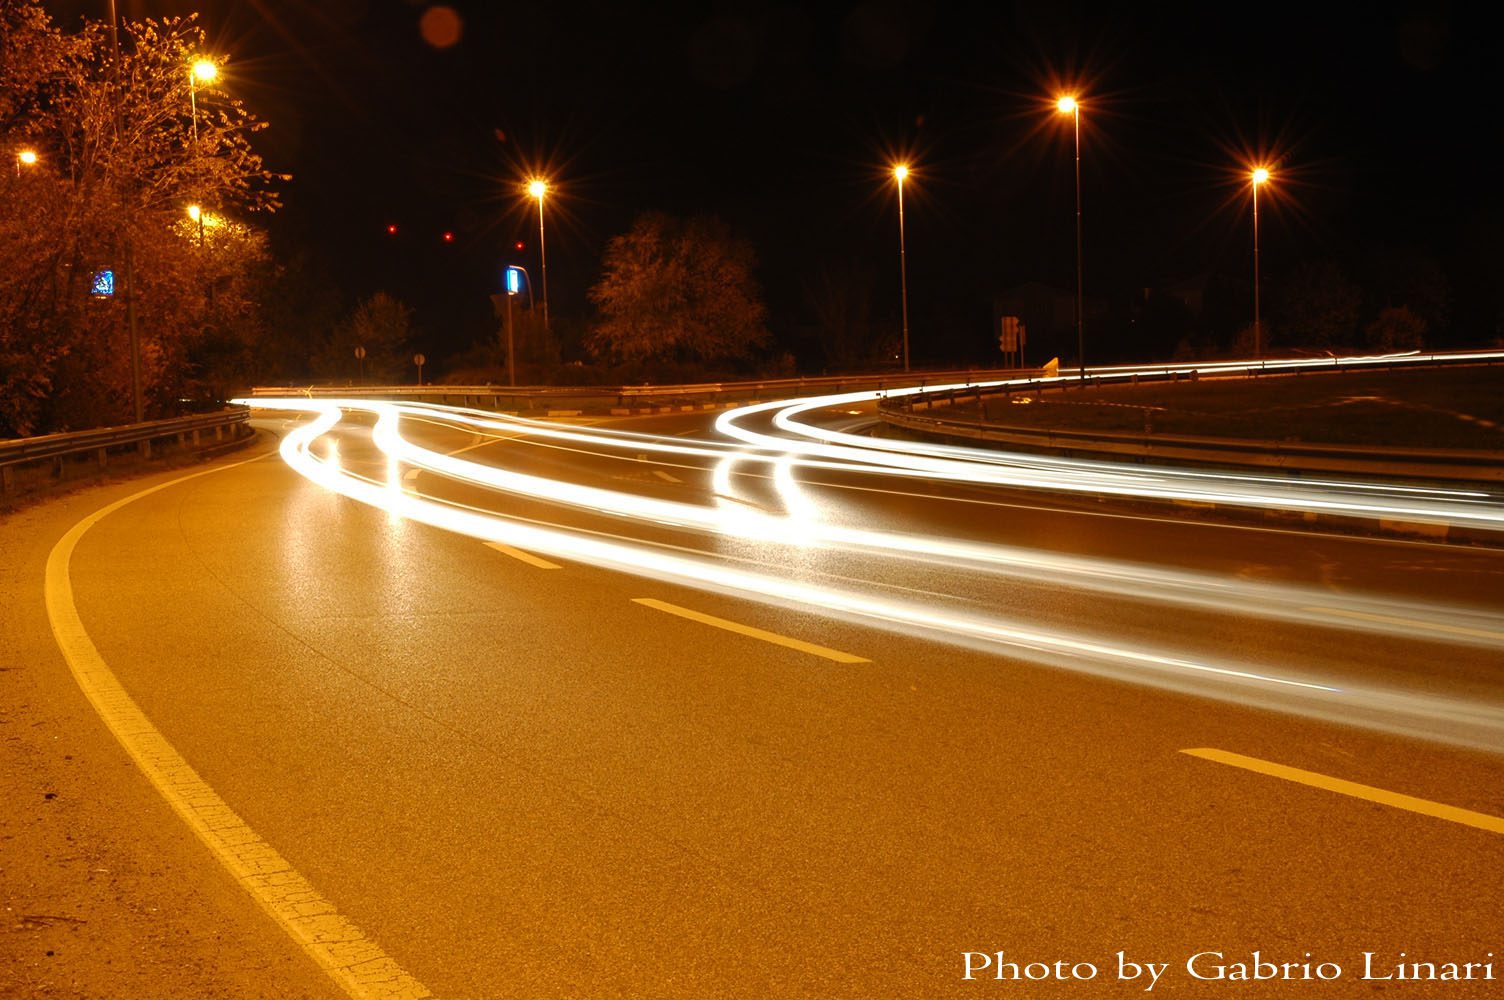 Cars at night on a roundabout in city